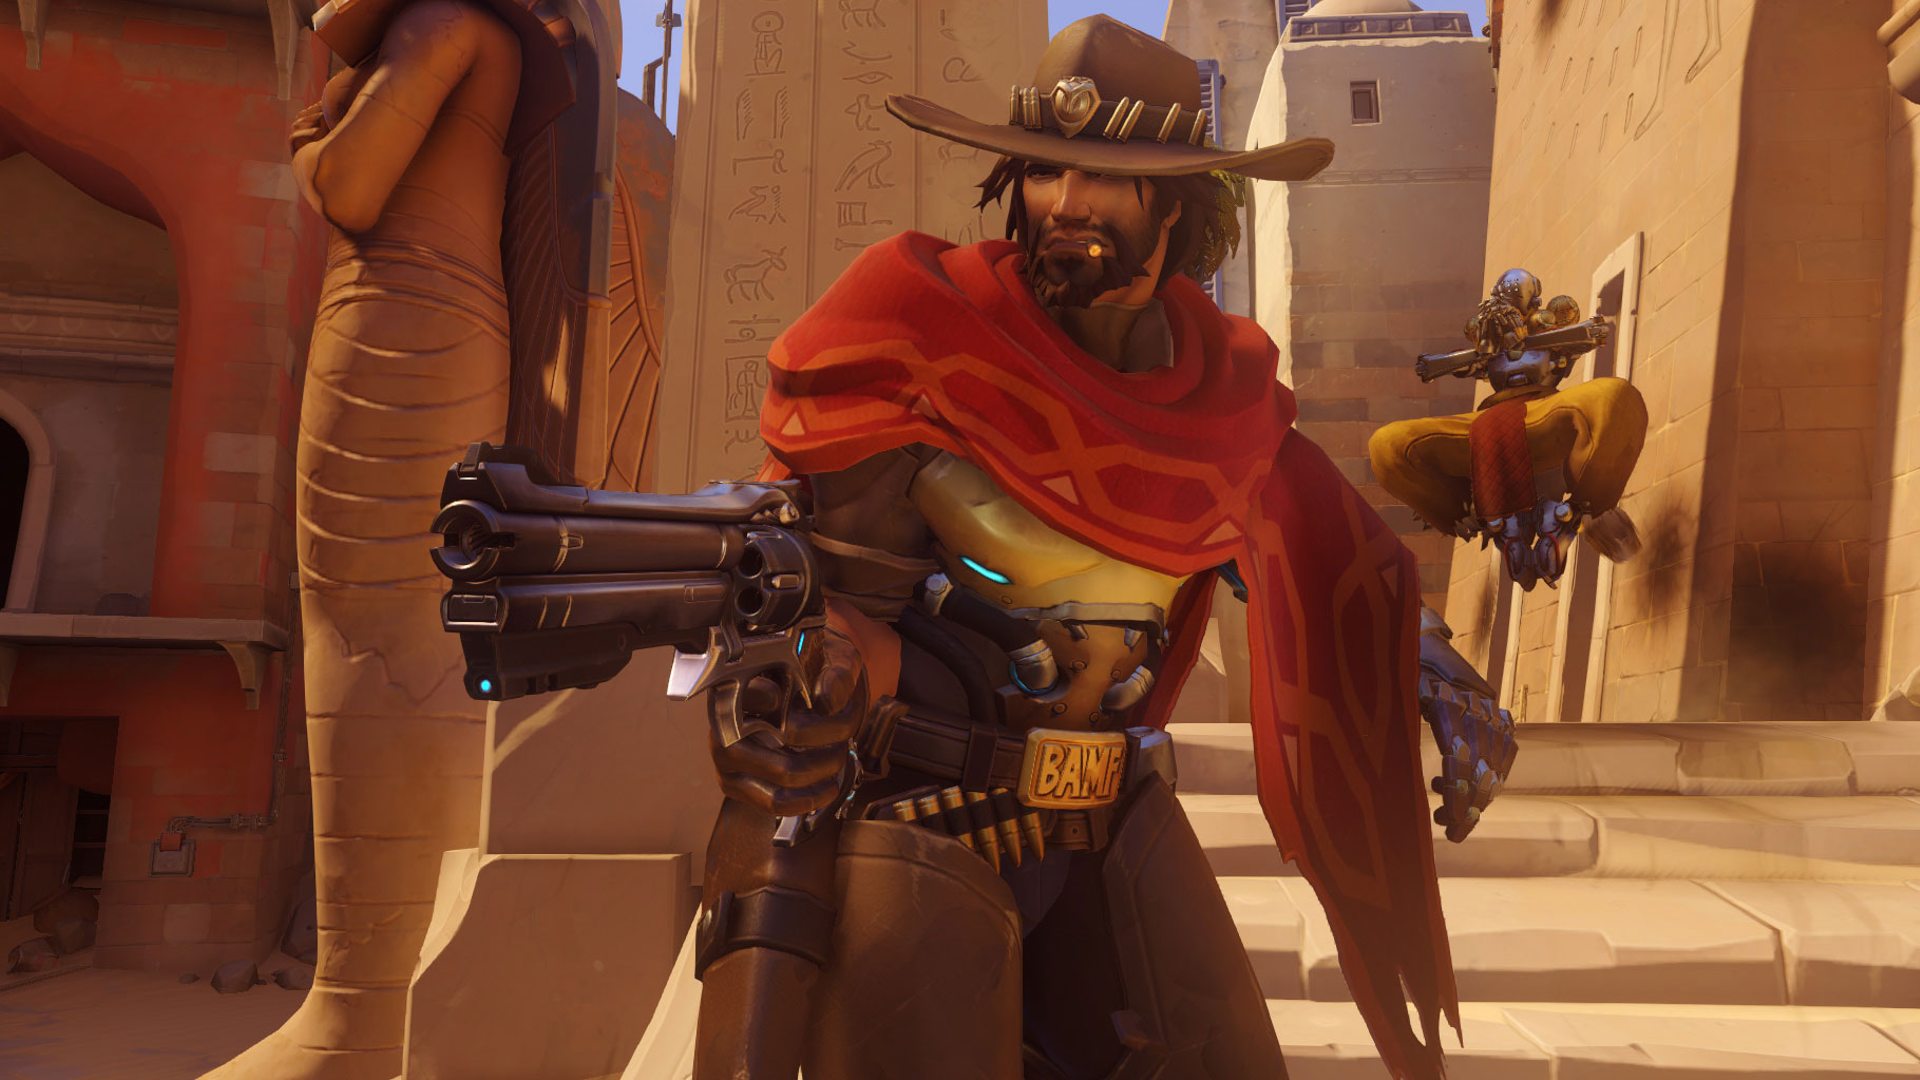 McCree can be seen aiming his weapon in a match with Zenyata behind him